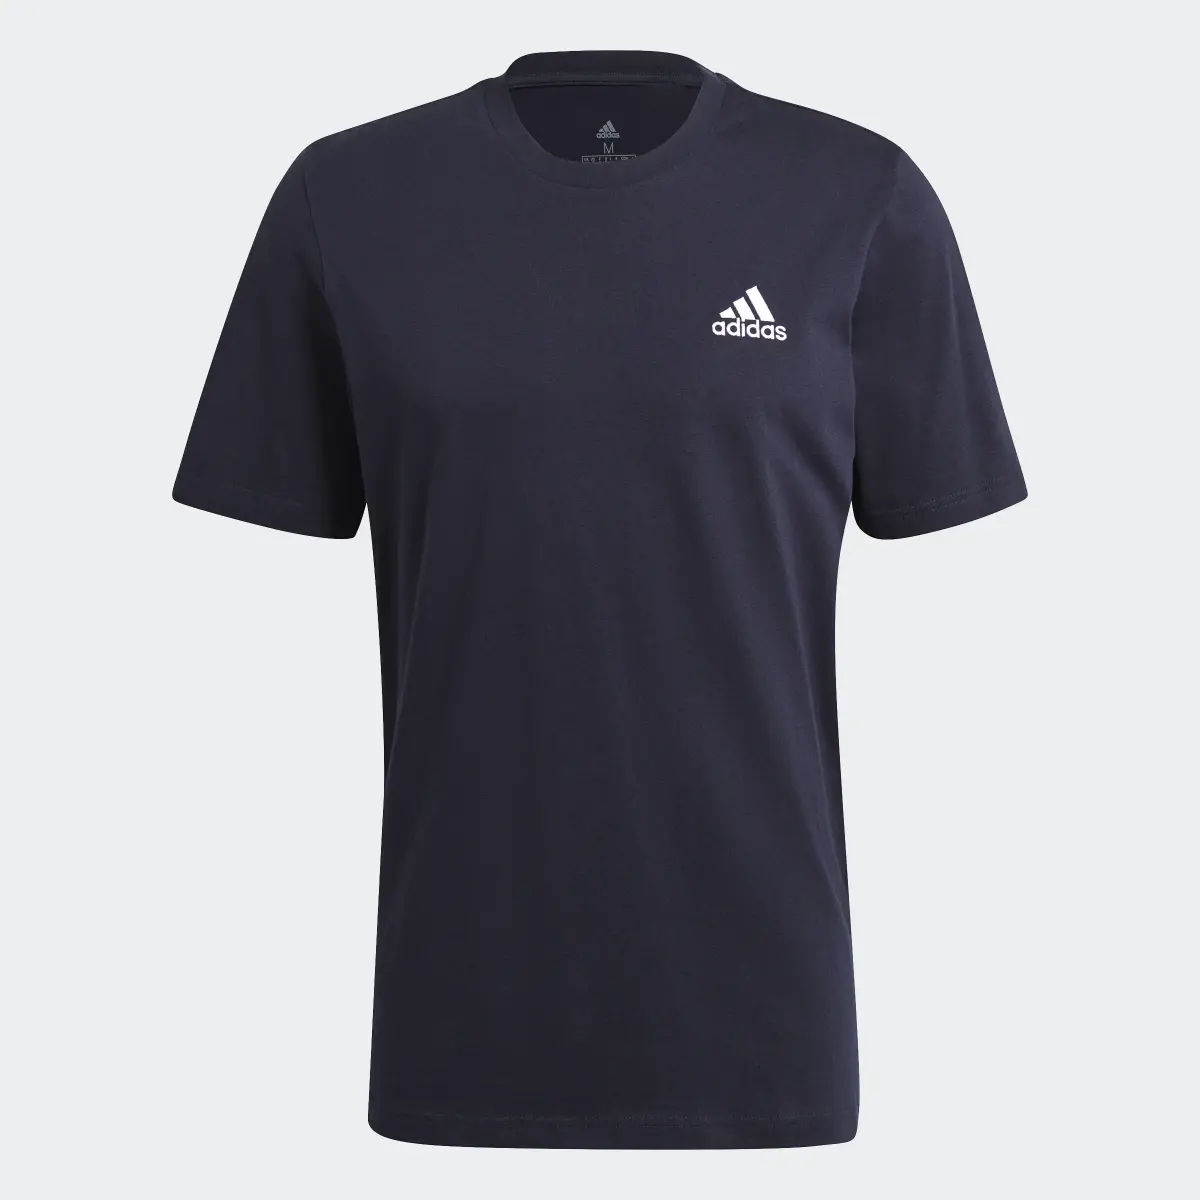 Adidas Essentials Embroidered Small Logo T-Shirt. 1